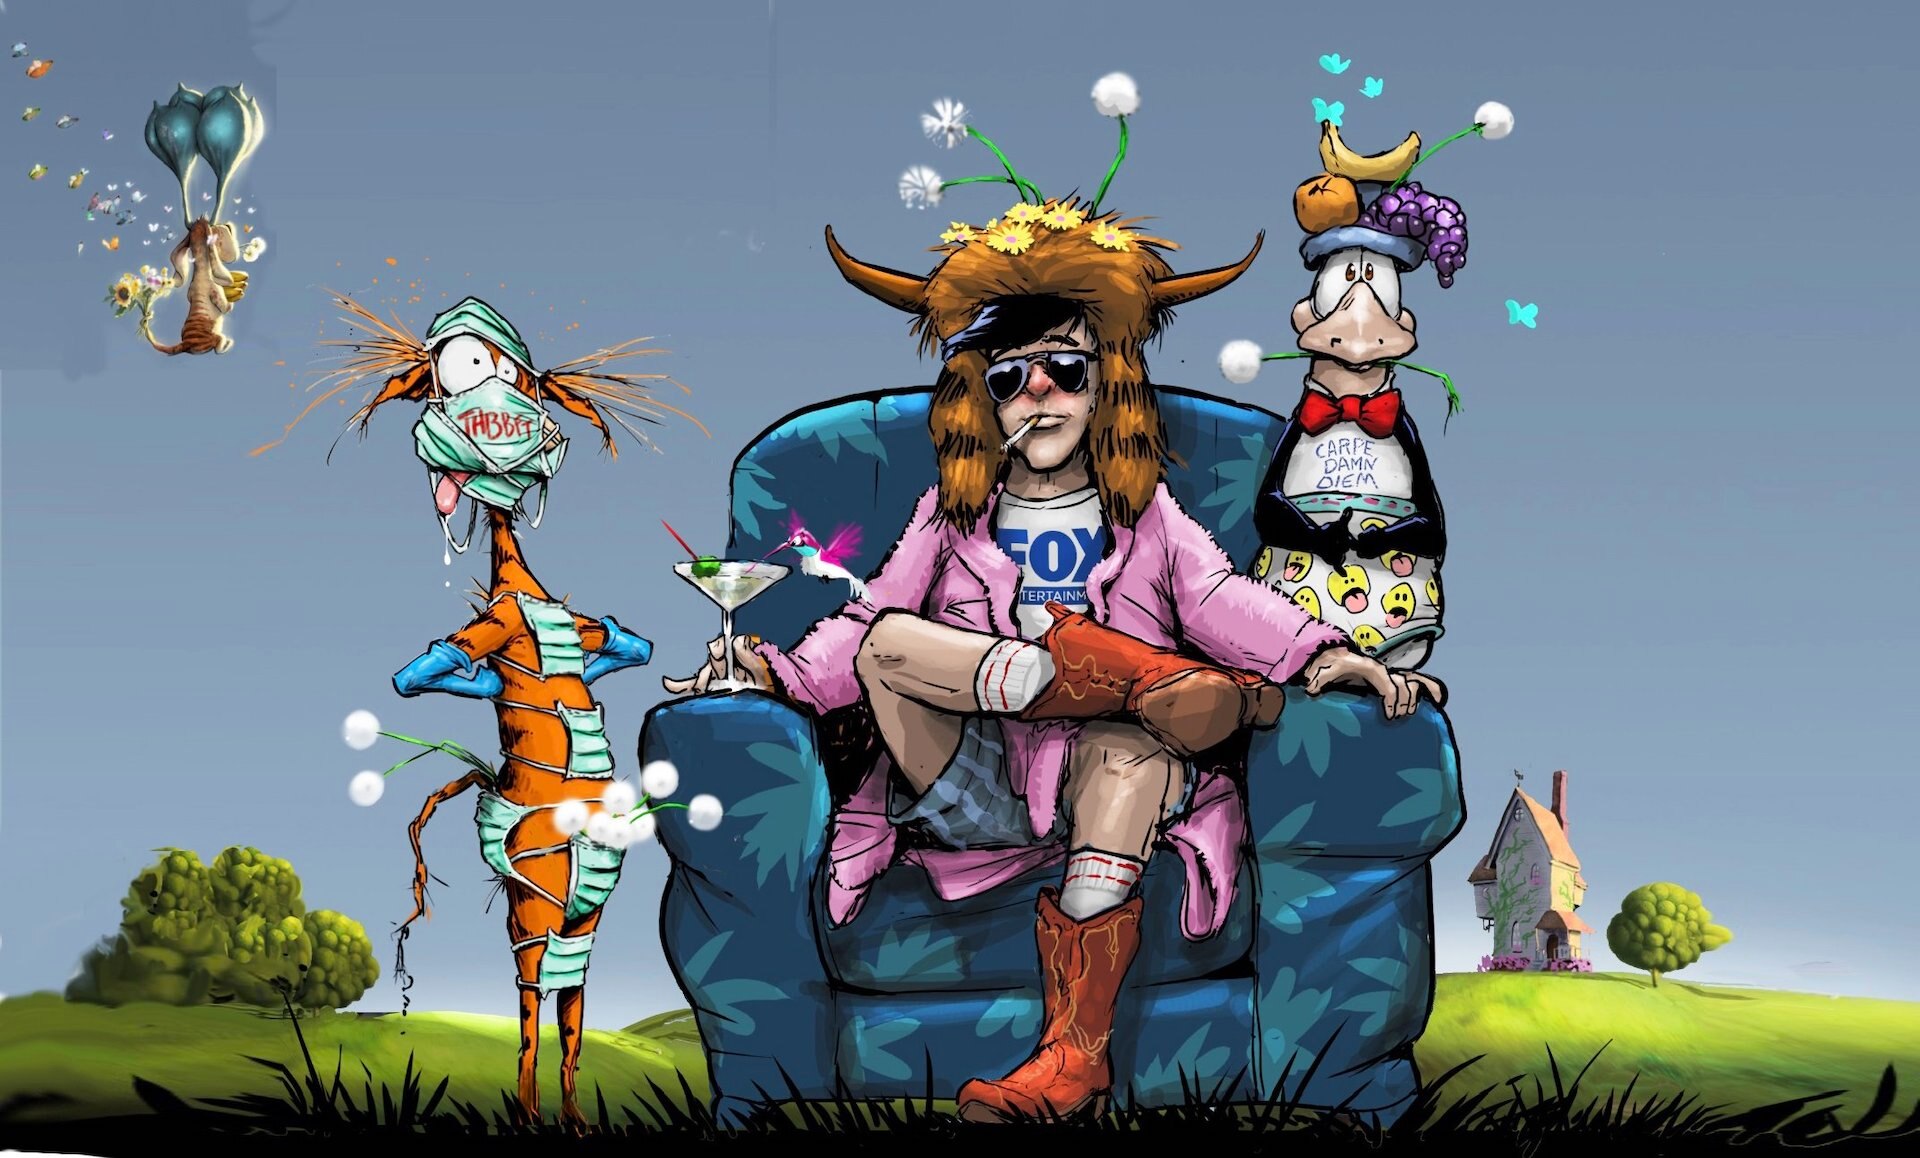 Bloom County animated series in the works at Fox | SYFY WIRE